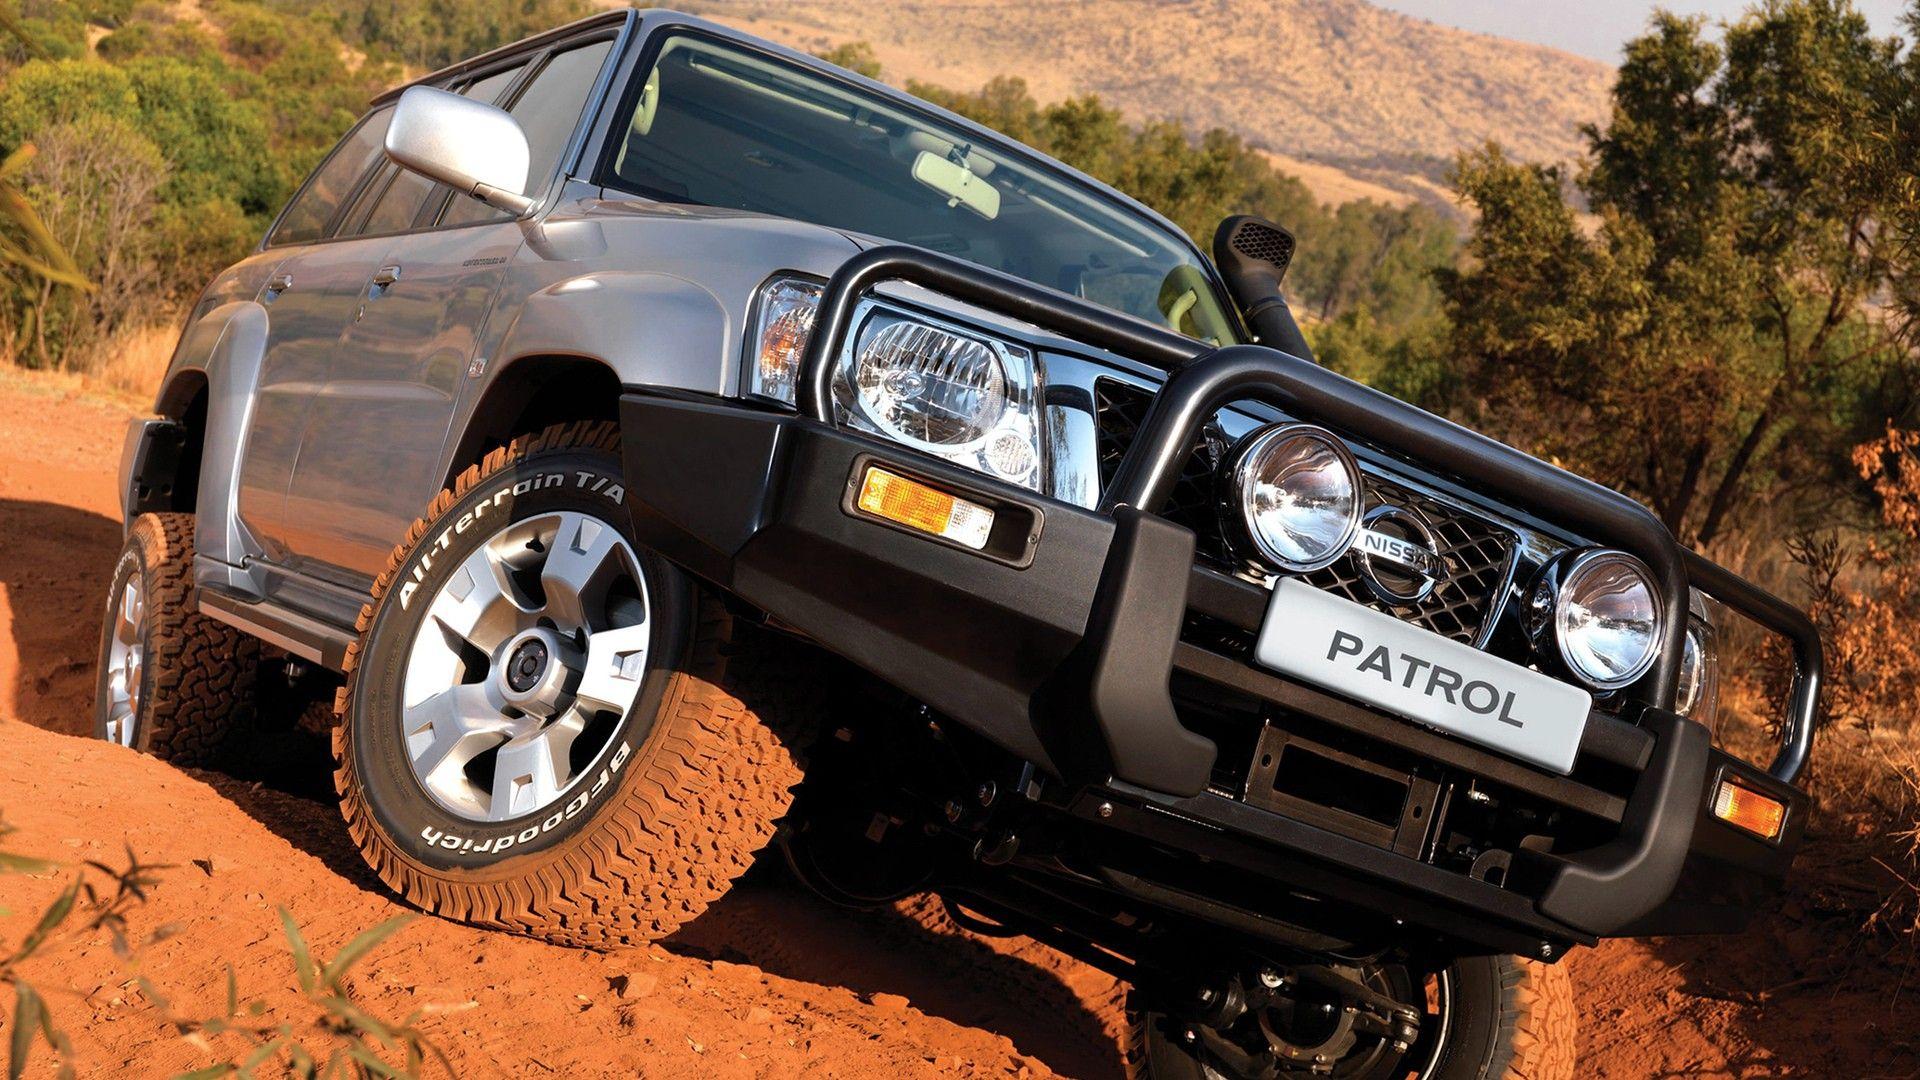 Cars vehicles transportation wheels offroad automobiles Nissan